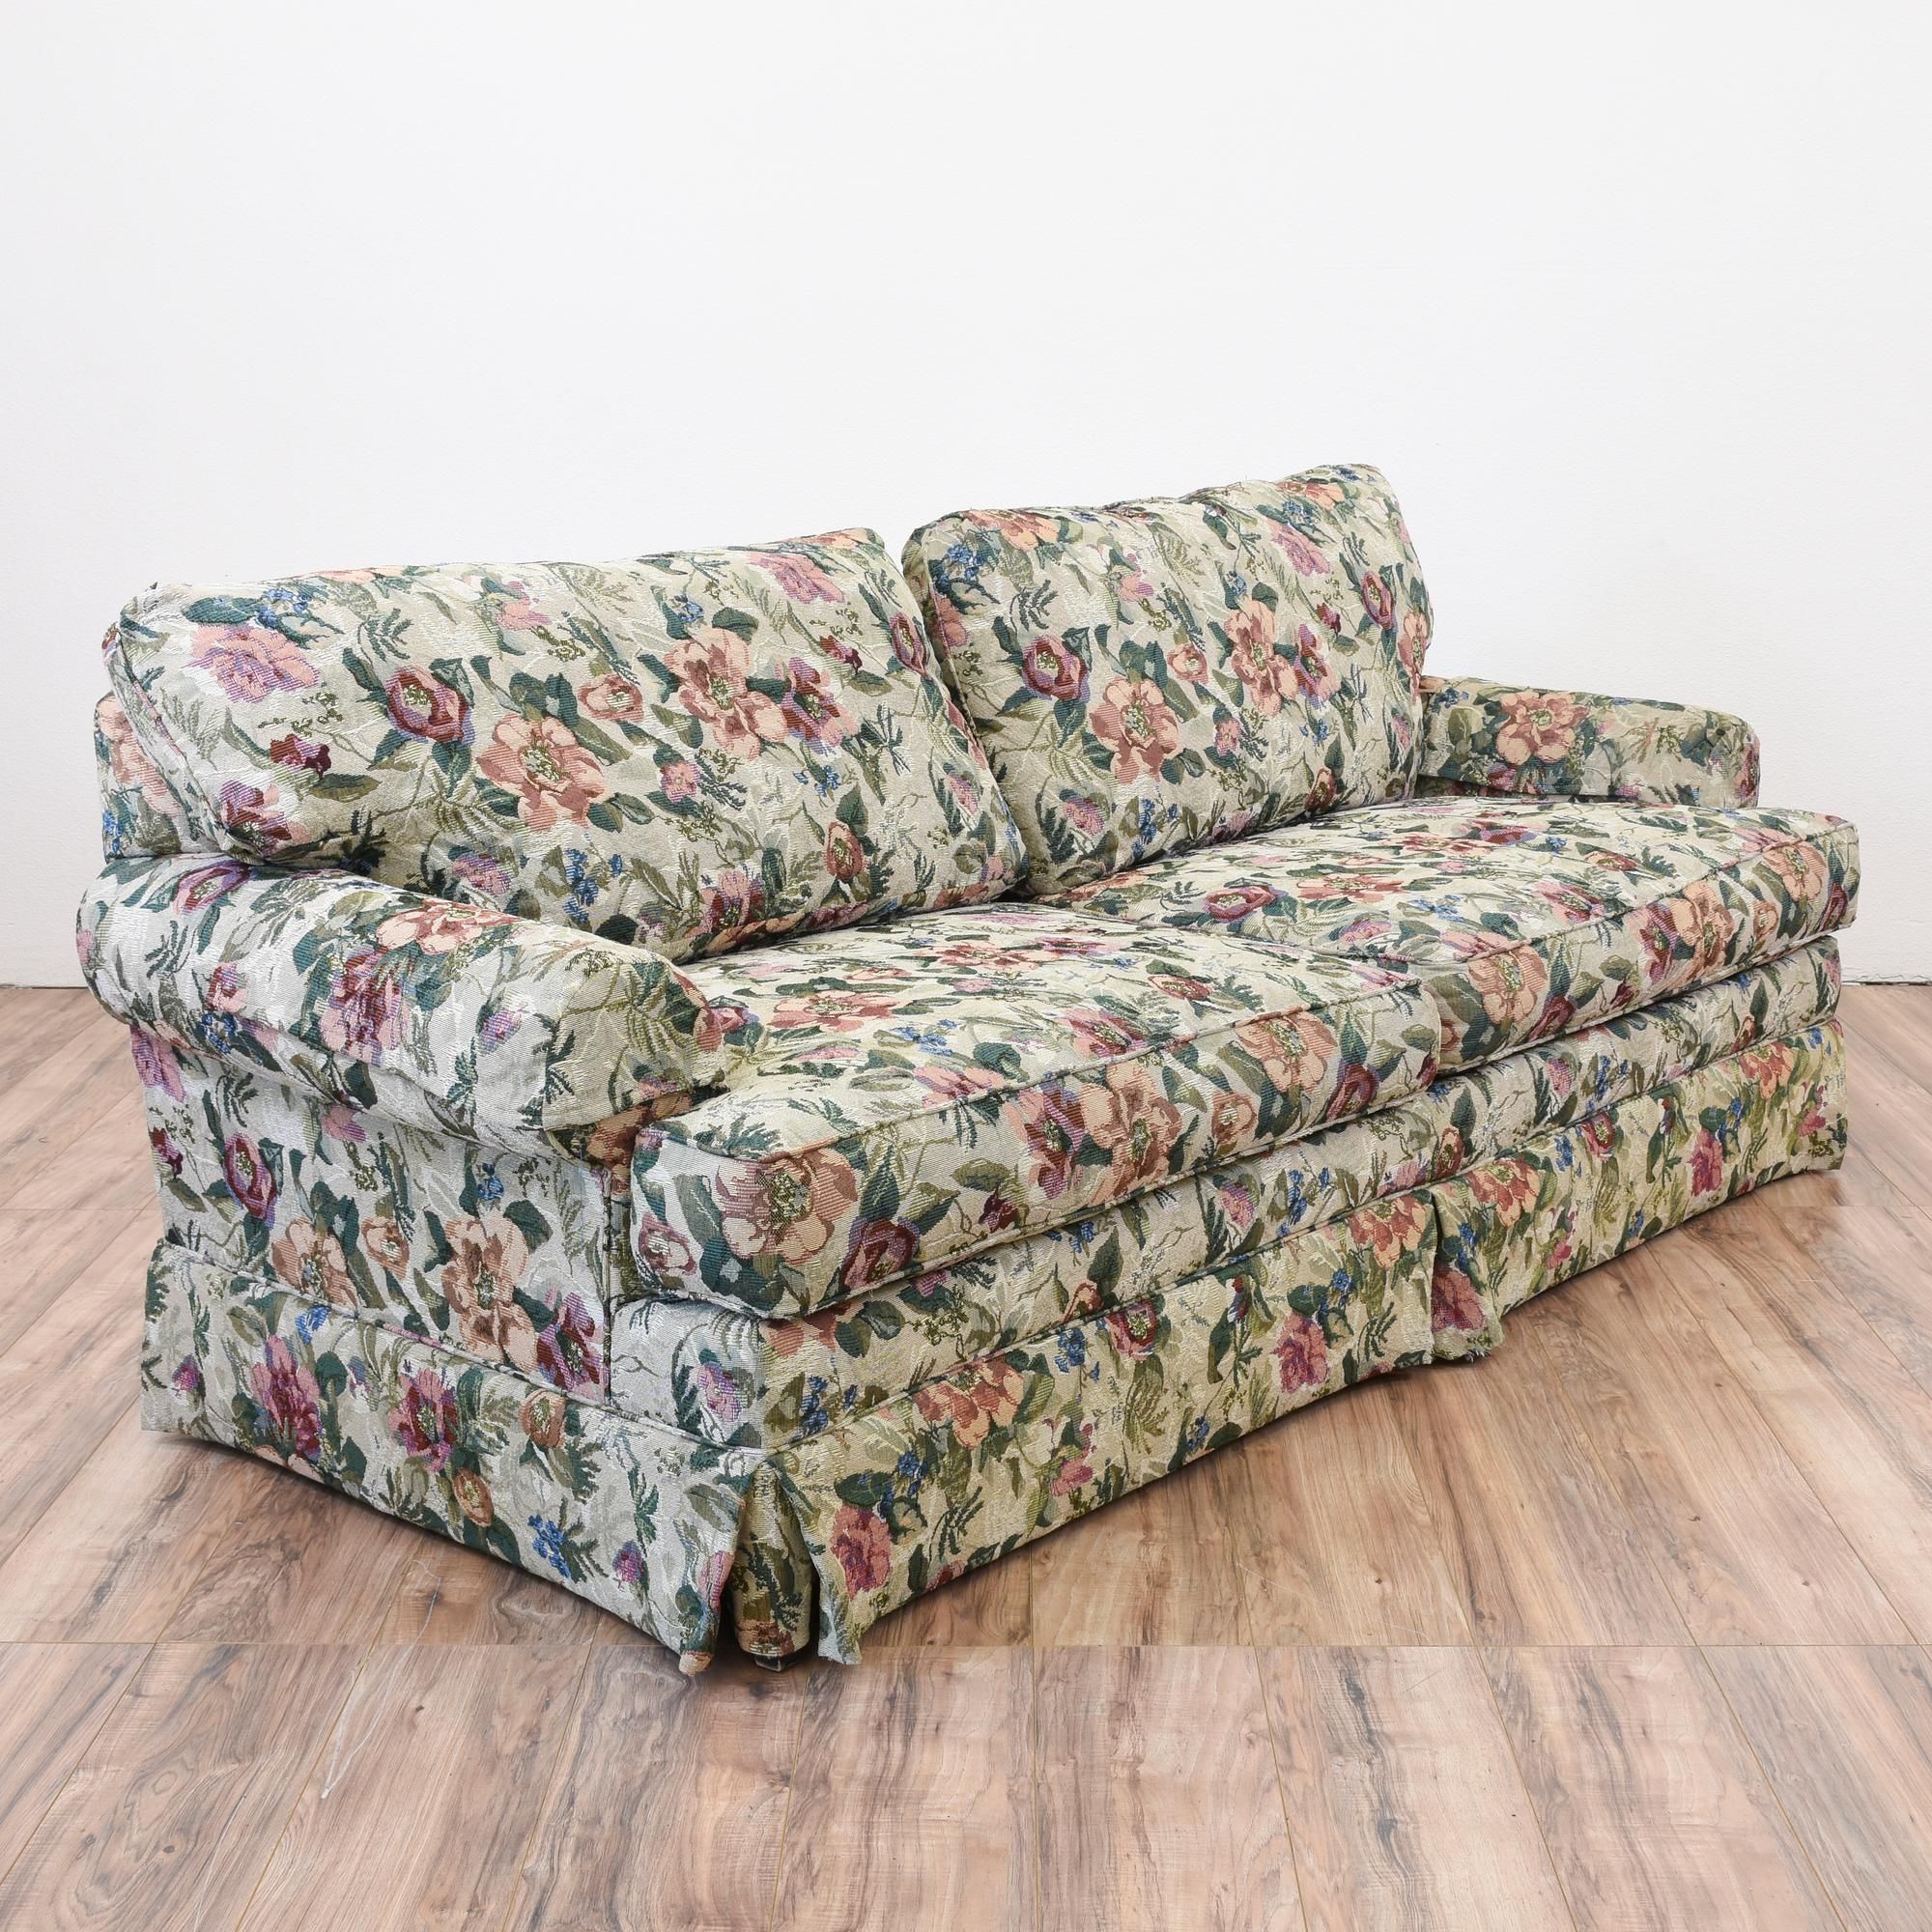 This Colorful Sofa Is Featured In Grey Needlepoint Fabric And Floral Intended For Sofas In Pattern (Gallery 13 of 20)